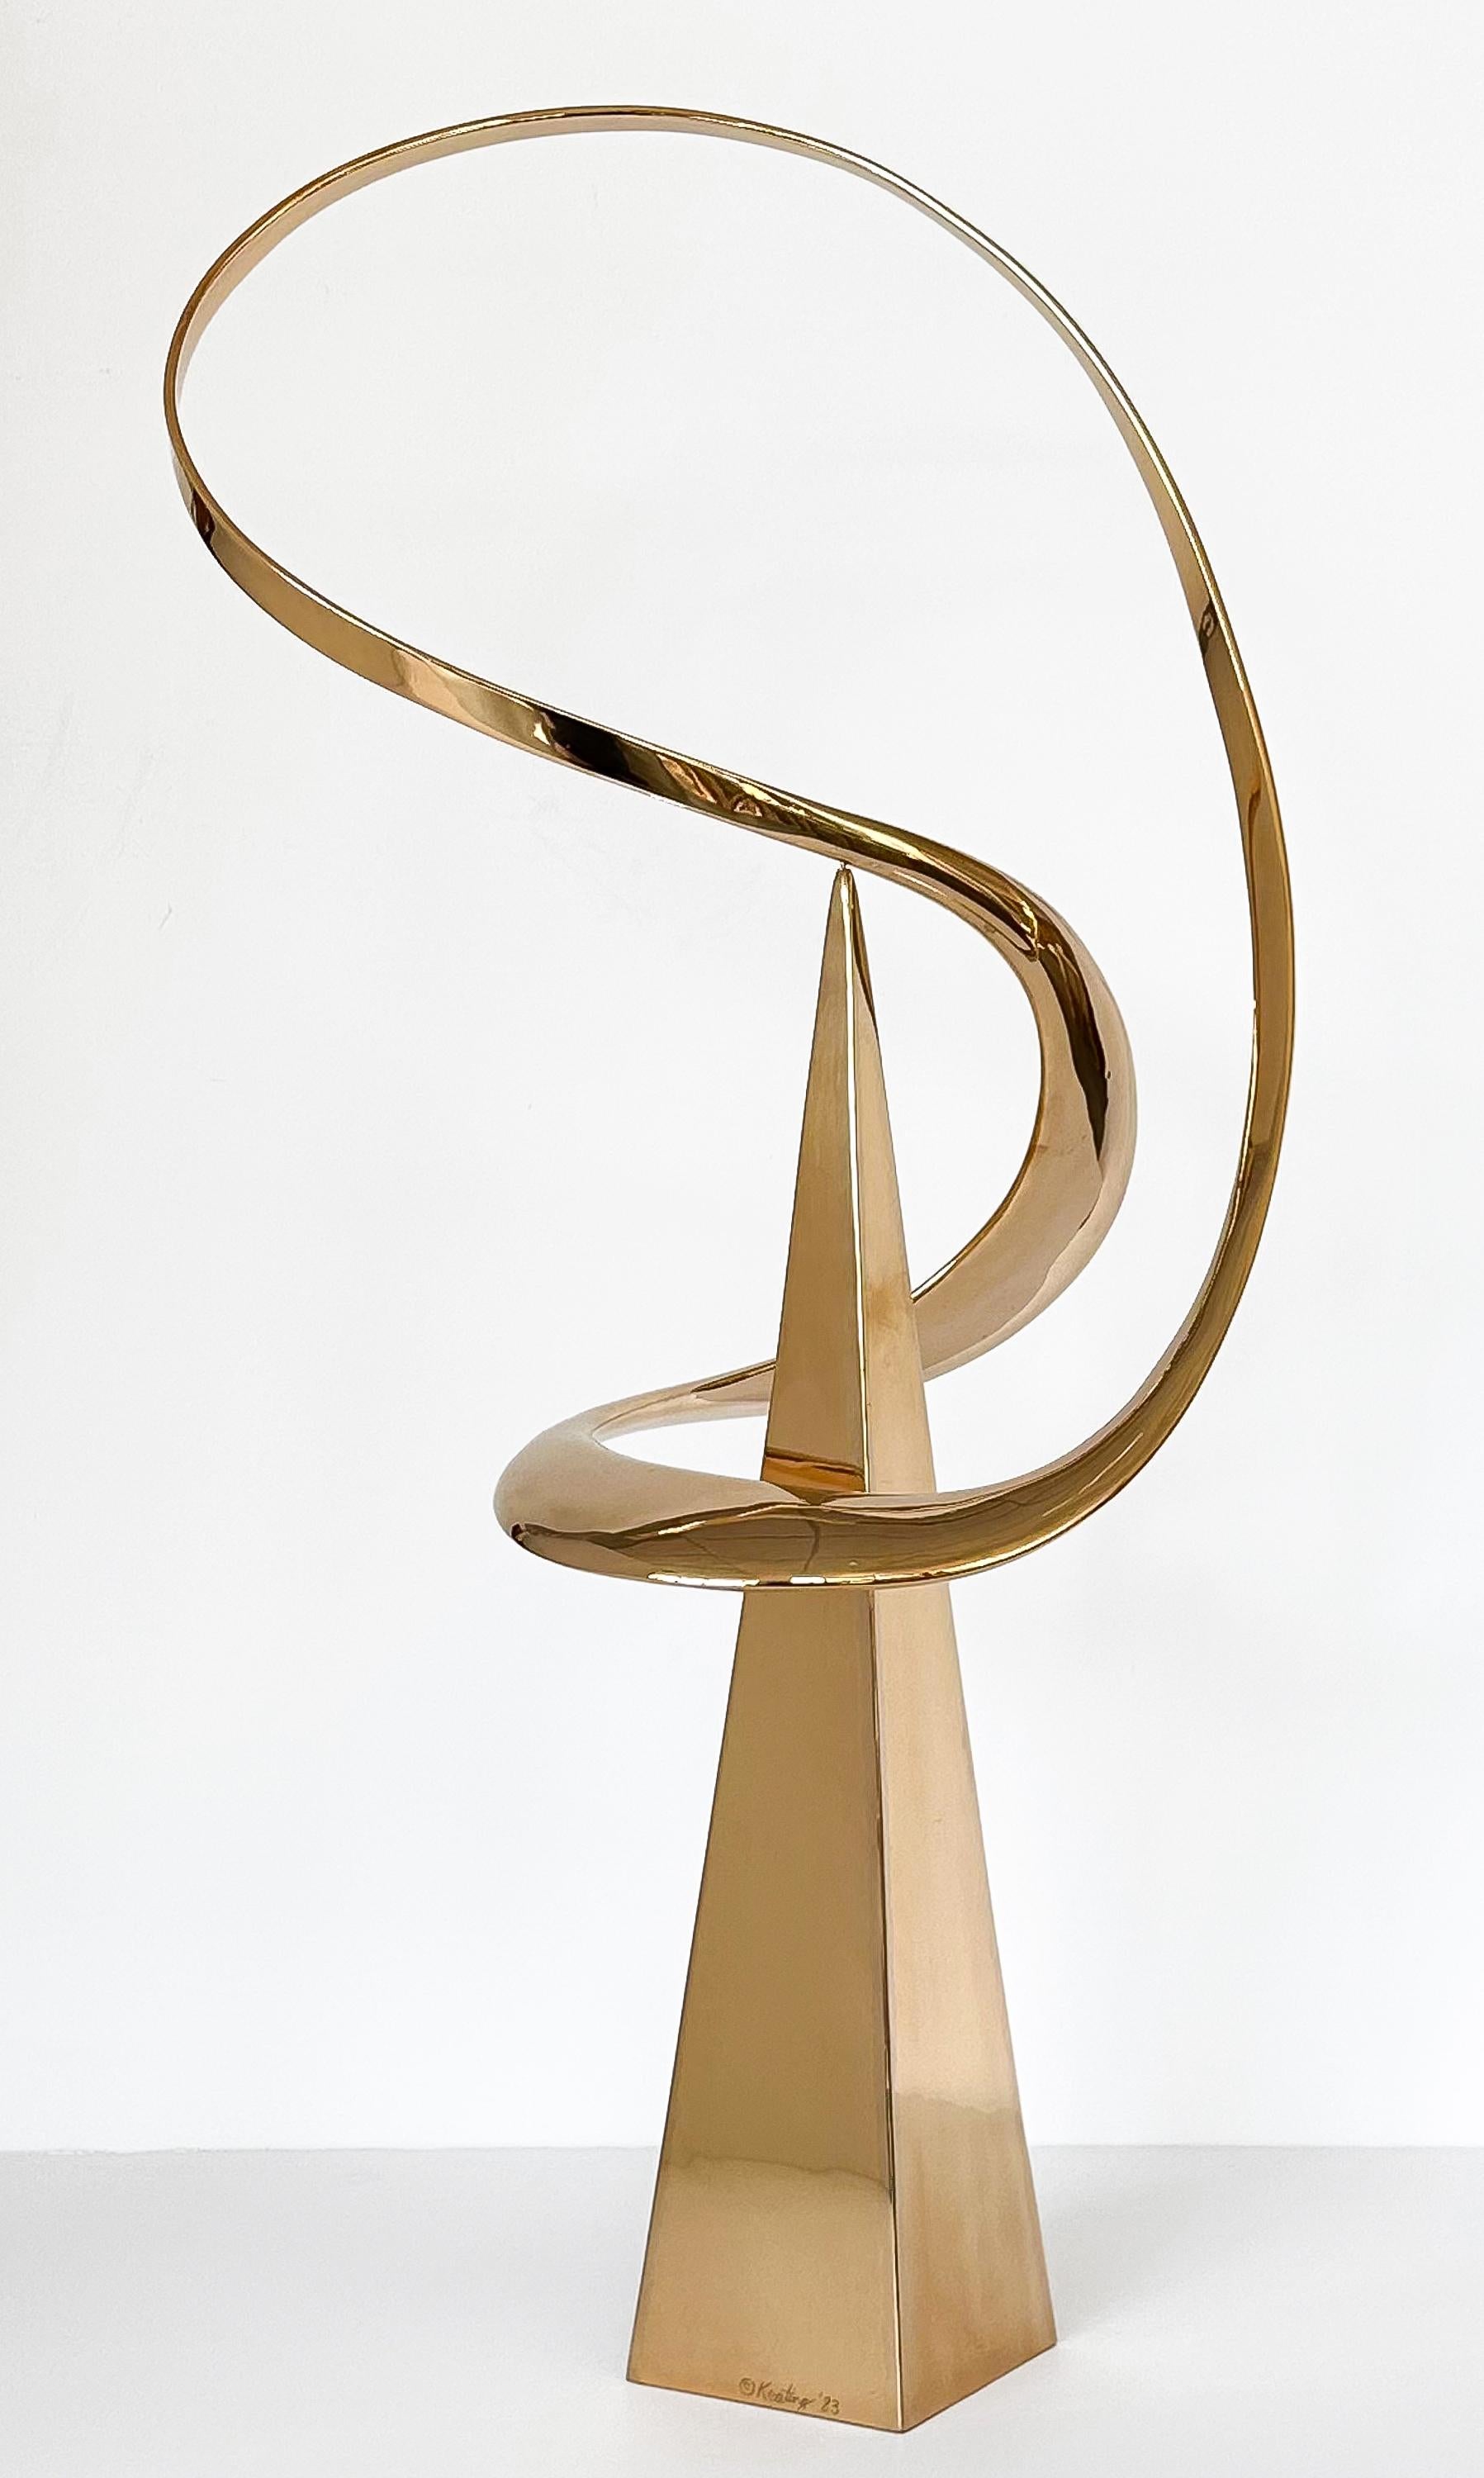 Introducing an outstanding large abstract kinetic bronze sculpture by renowned Illinois artist Bill Keating. Born in 1932, Keating is celebrated for his extraordinary ability to breathe life into static materials, and this kinetic sculpture, crafted